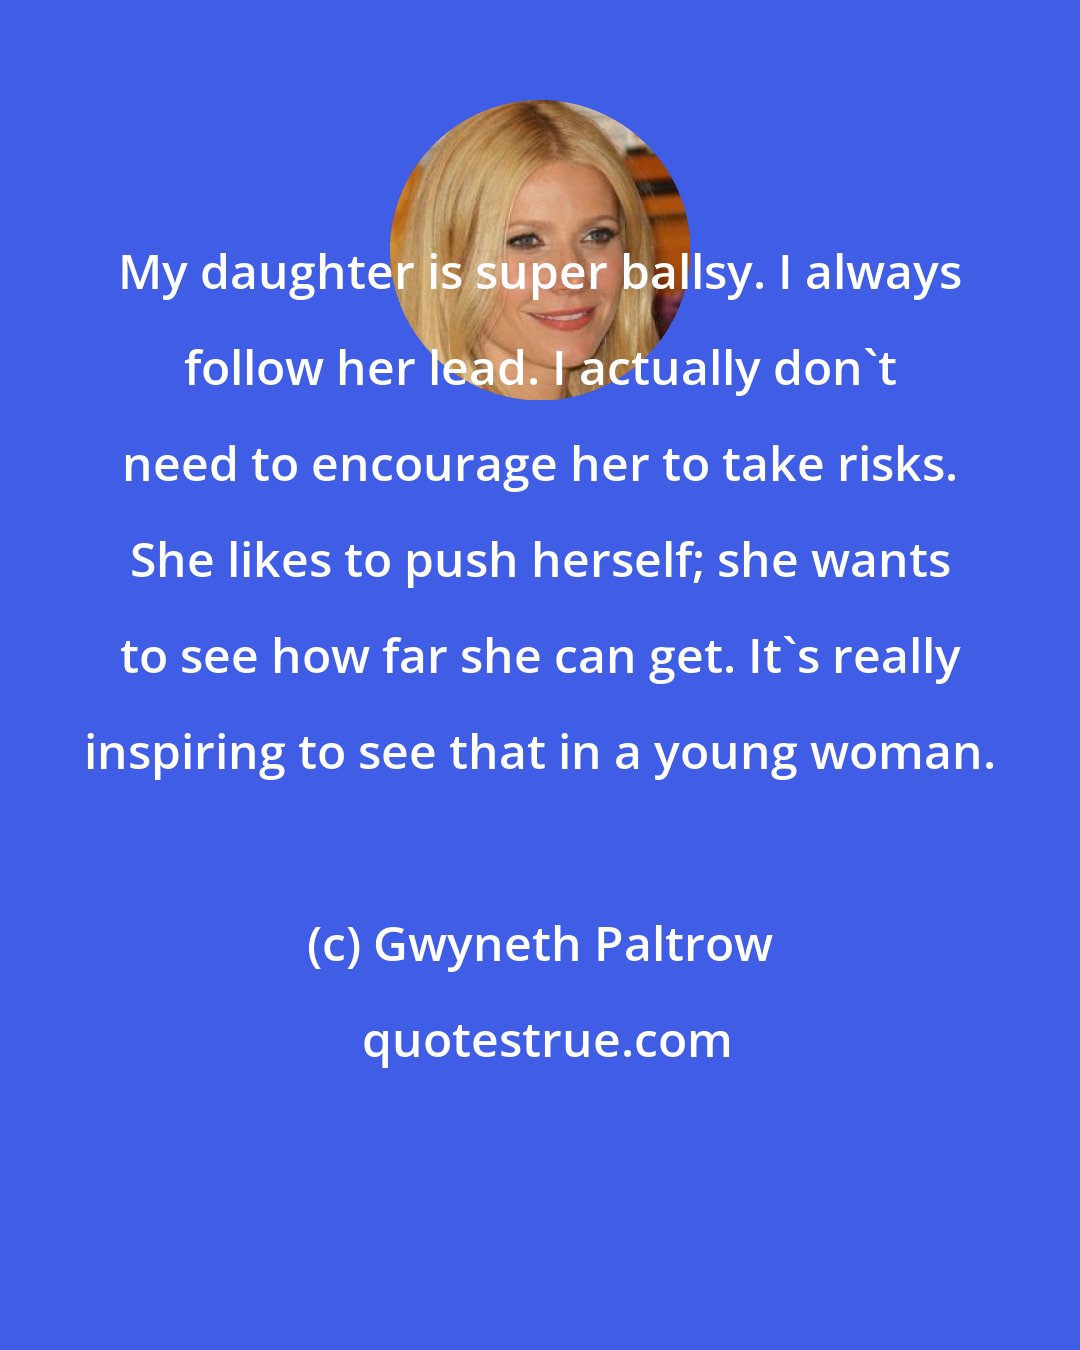 Gwyneth Paltrow: My daughter is super ballsy. I always follow her lead. I actually don't need to encourage her to take risks. She likes to push herself; she wants to see how far she can get. It's really inspiring to see that in a young woman.